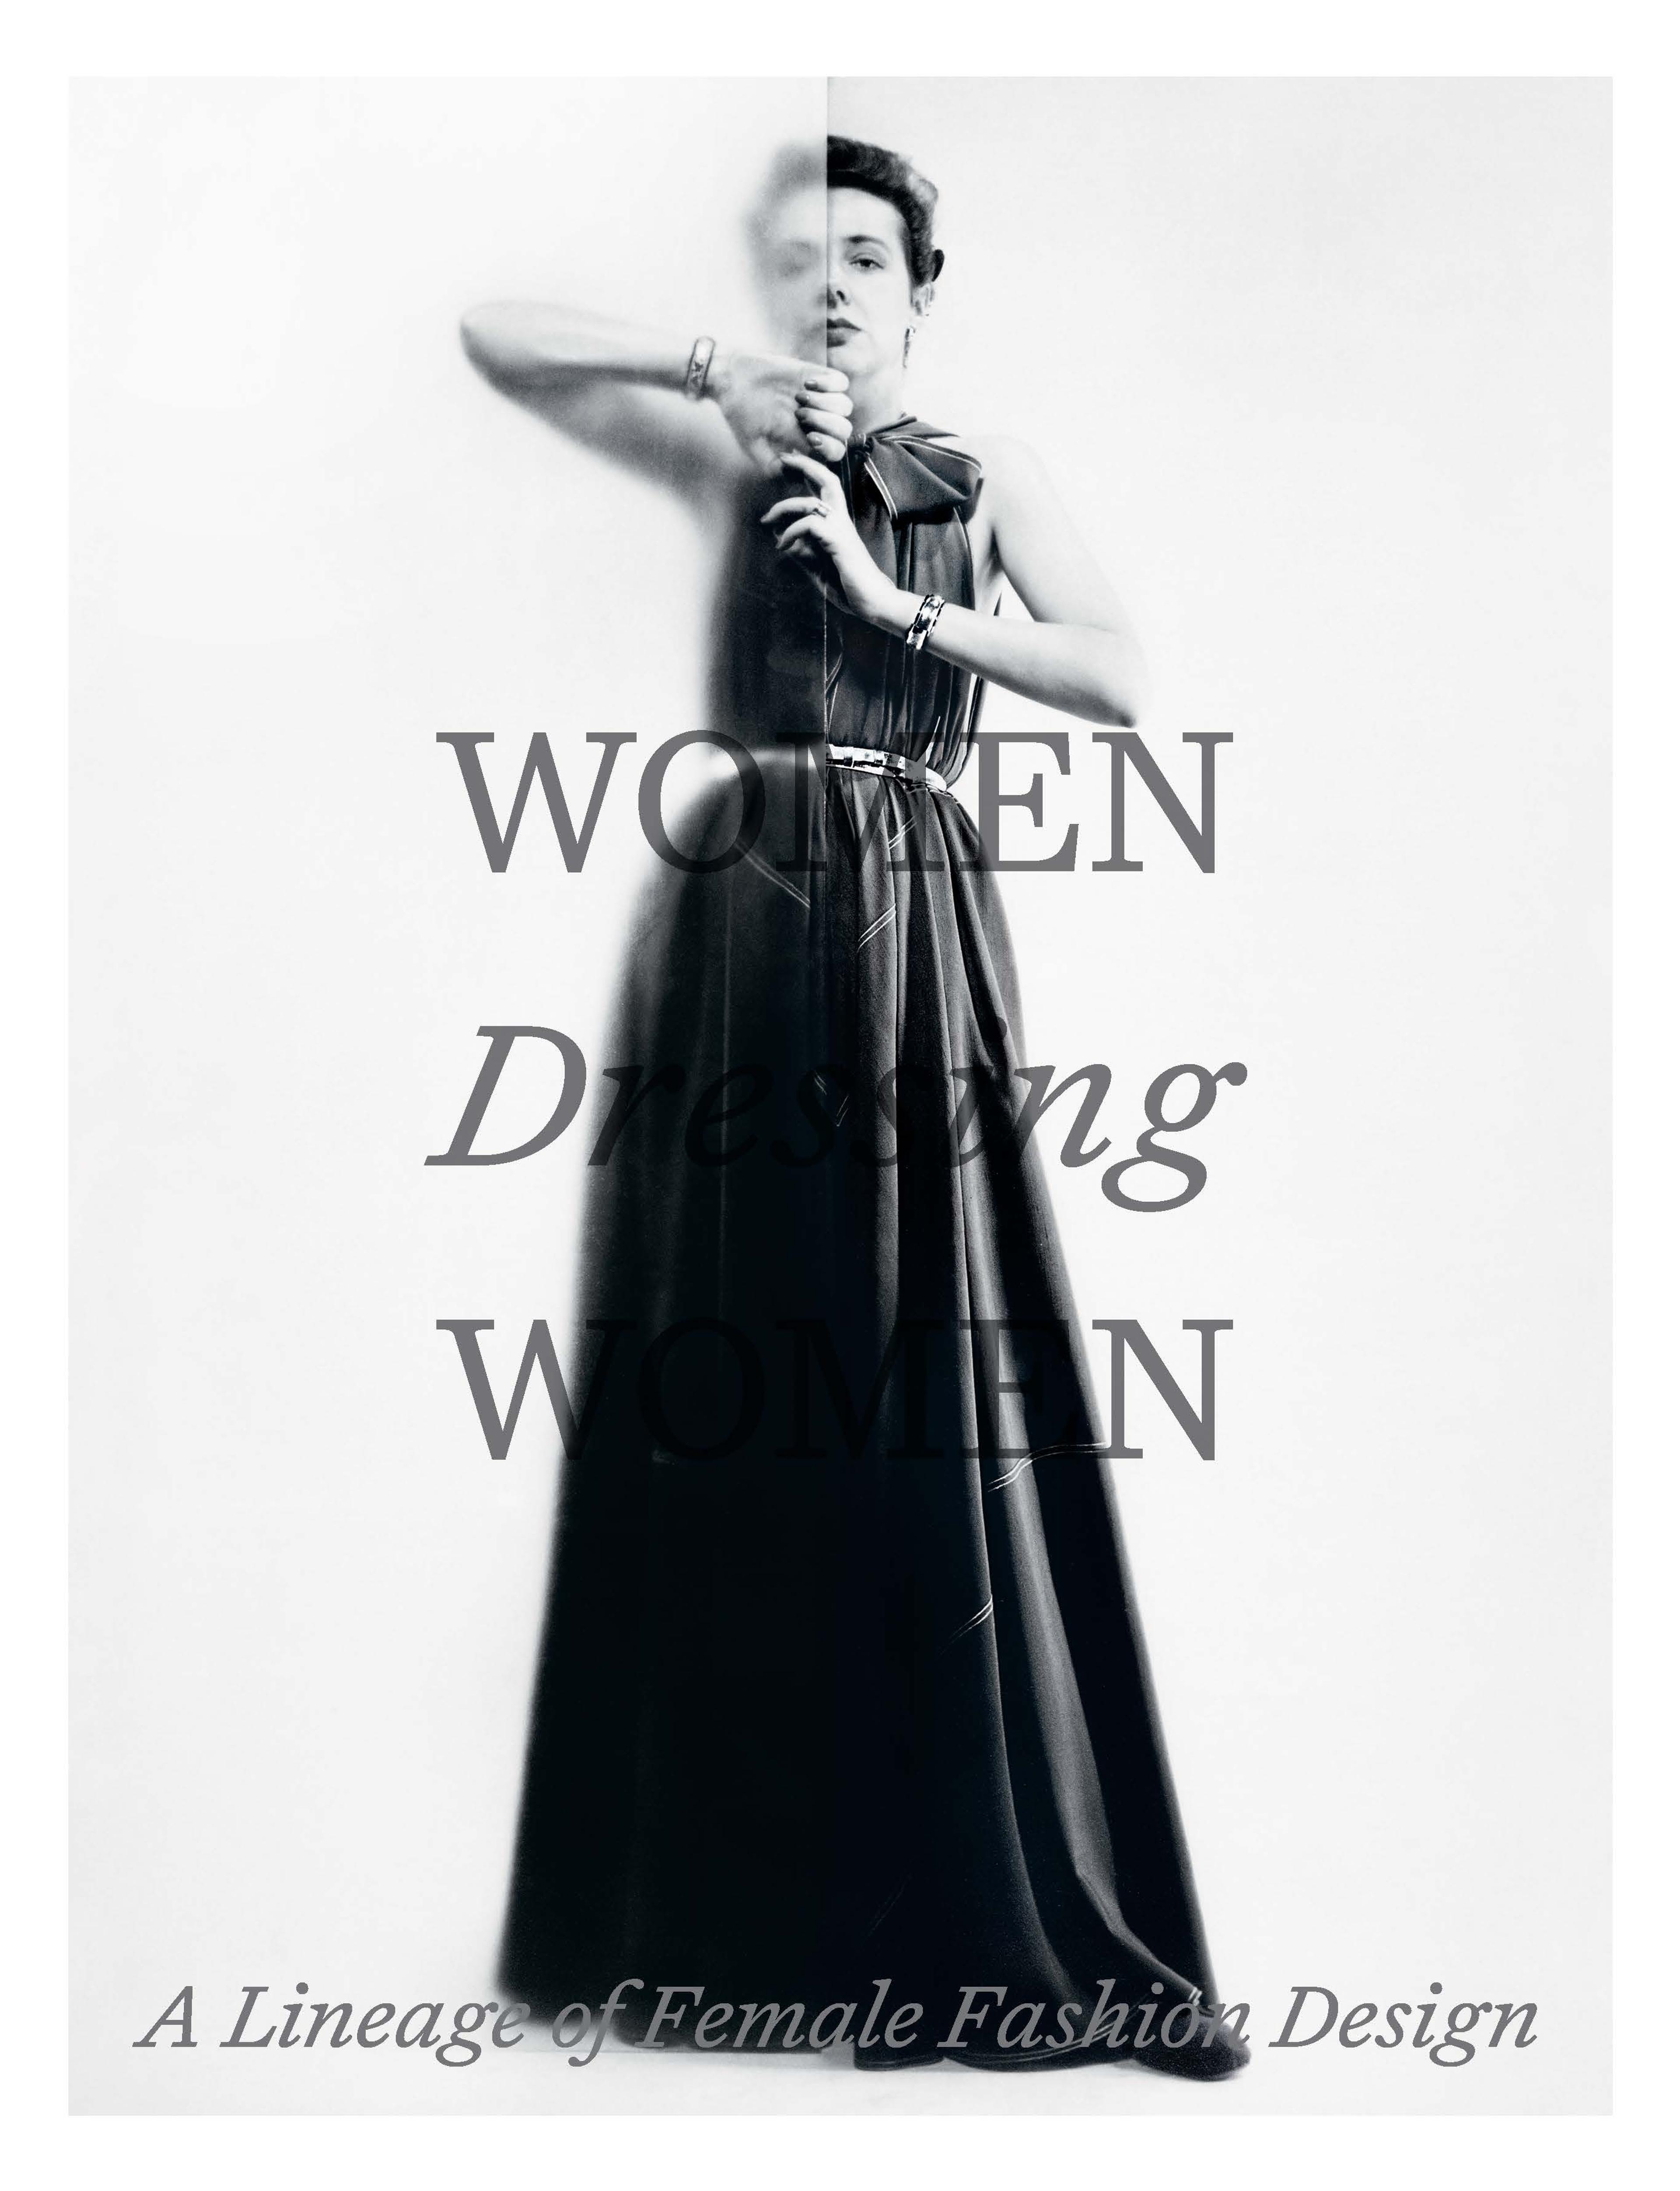 A black-and-white image with a neutral background of fashion designer Claire McCardell wearing a belted, sleeveless dress with a bow tied neck. Her hair is pulled back. She holds a translucent wall that partially obscures her right side. The following text is overlaid on the image in grey "Women Dressing Women: A Lineage of Female Fashion Design."